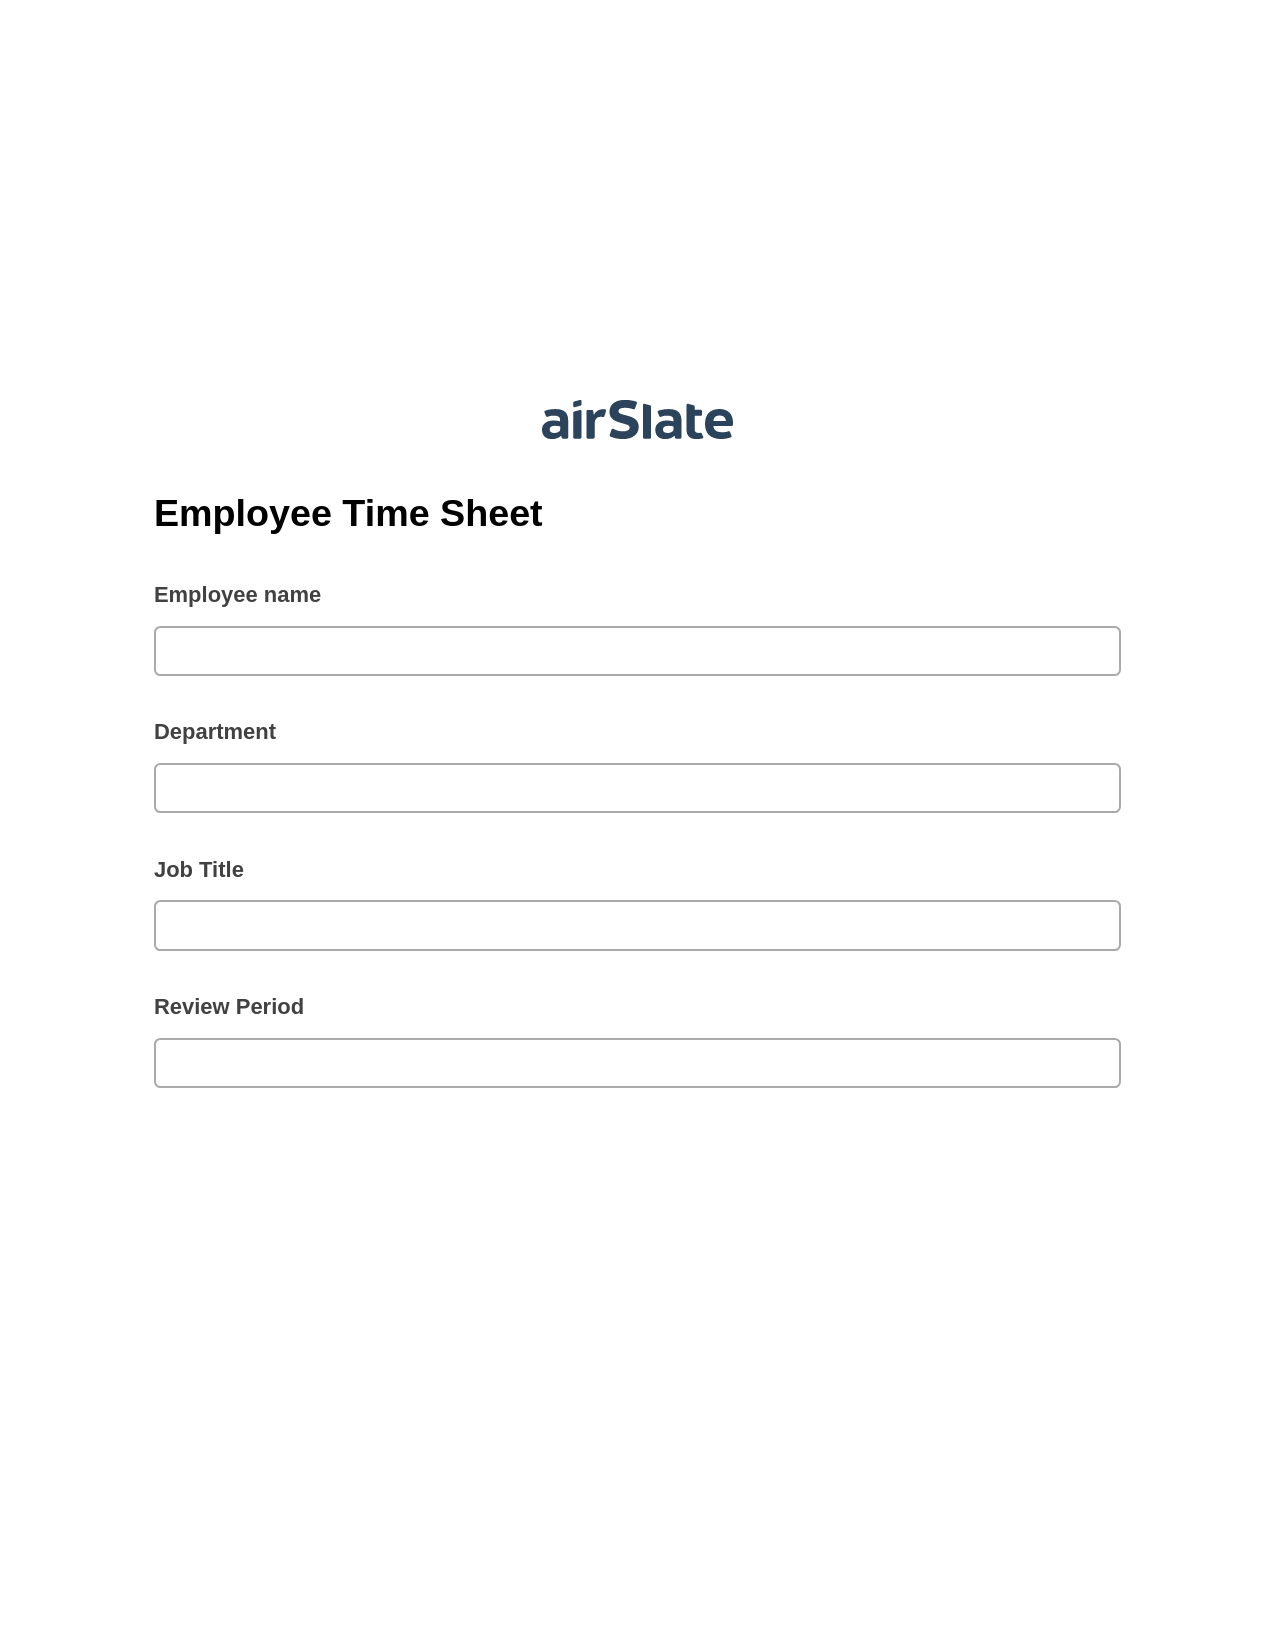 Employee Time Sheet Pre-fill from MySQL Bot, Update Audit Trail Bot, Archive to OneDrive Bot